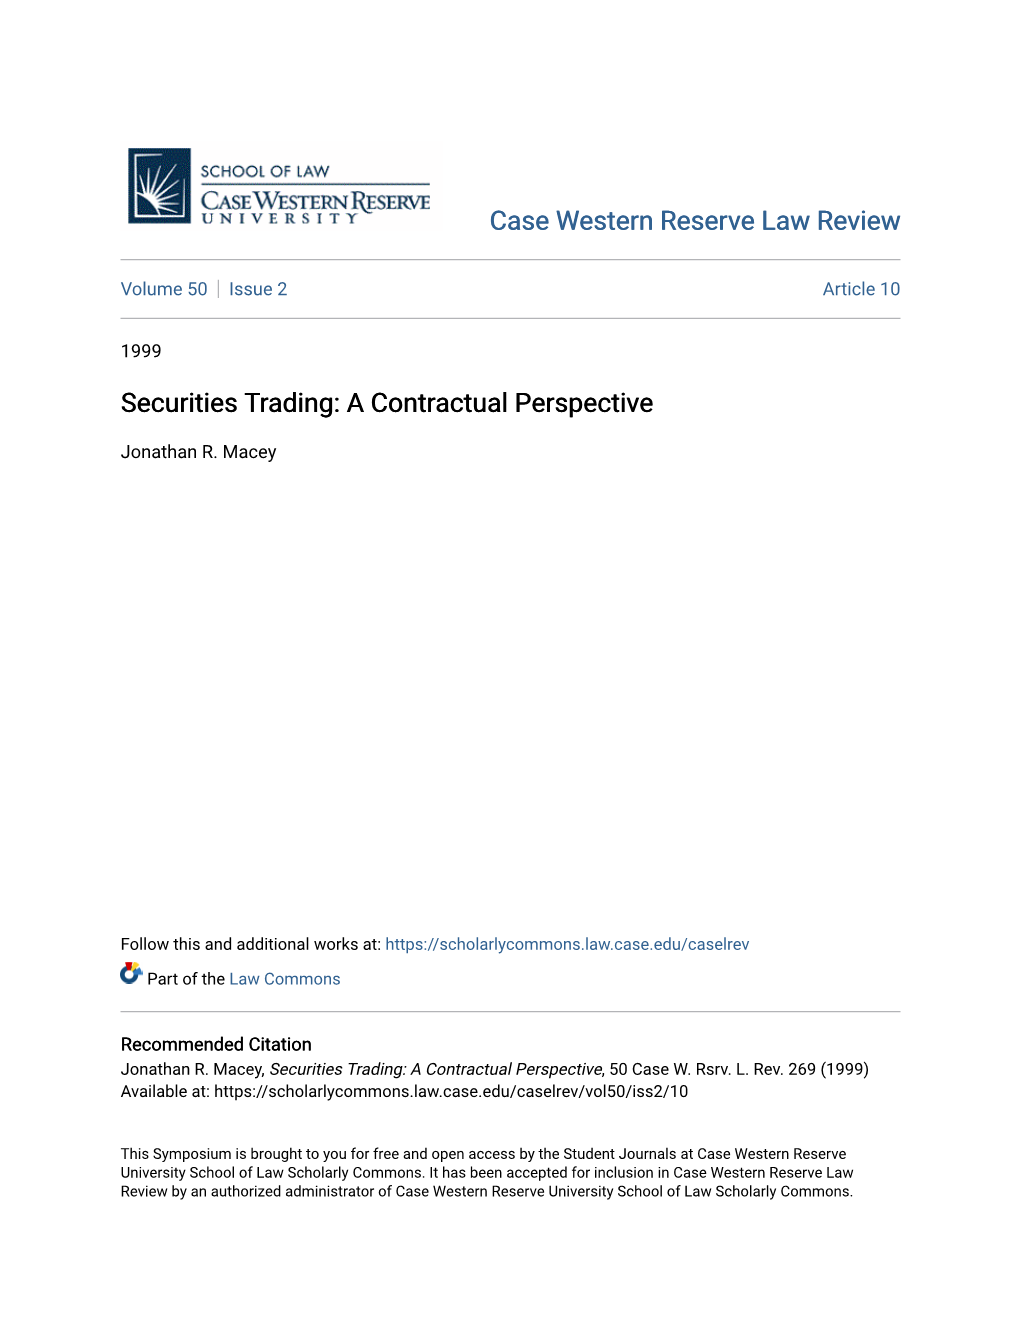 Securities Trading: a Contractual Perspective